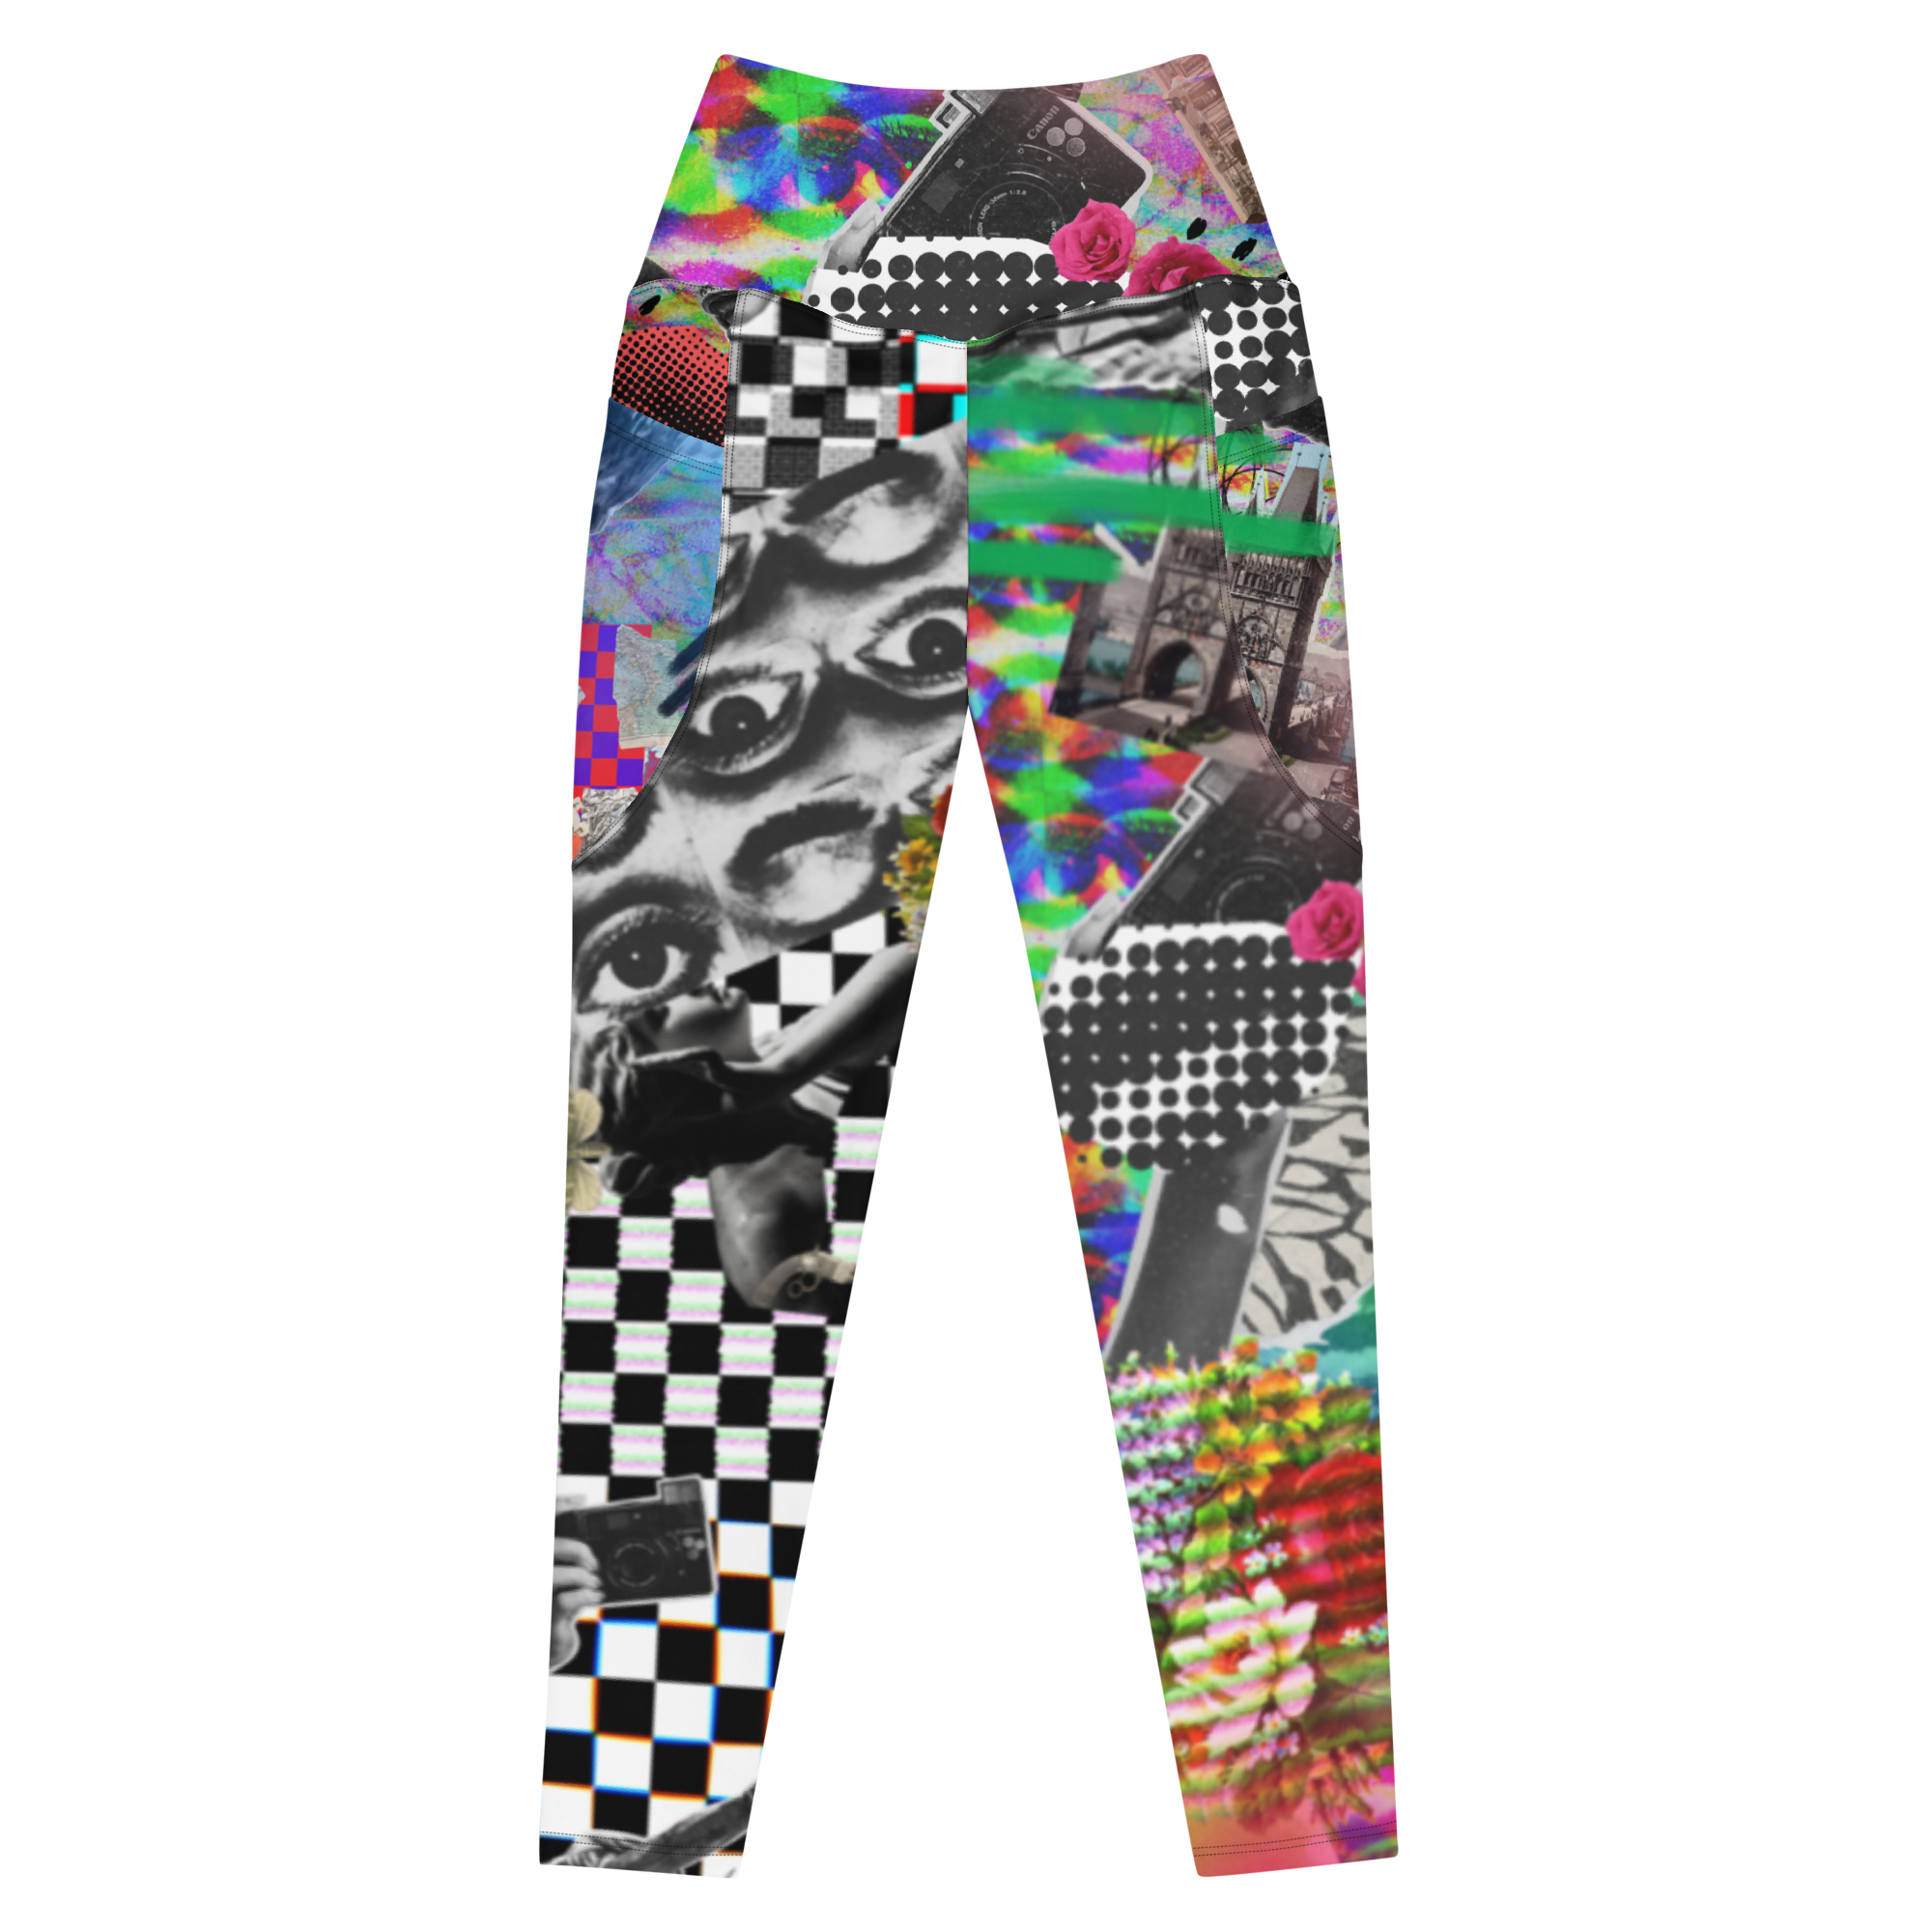 STRATIFIED Leggings with pockets